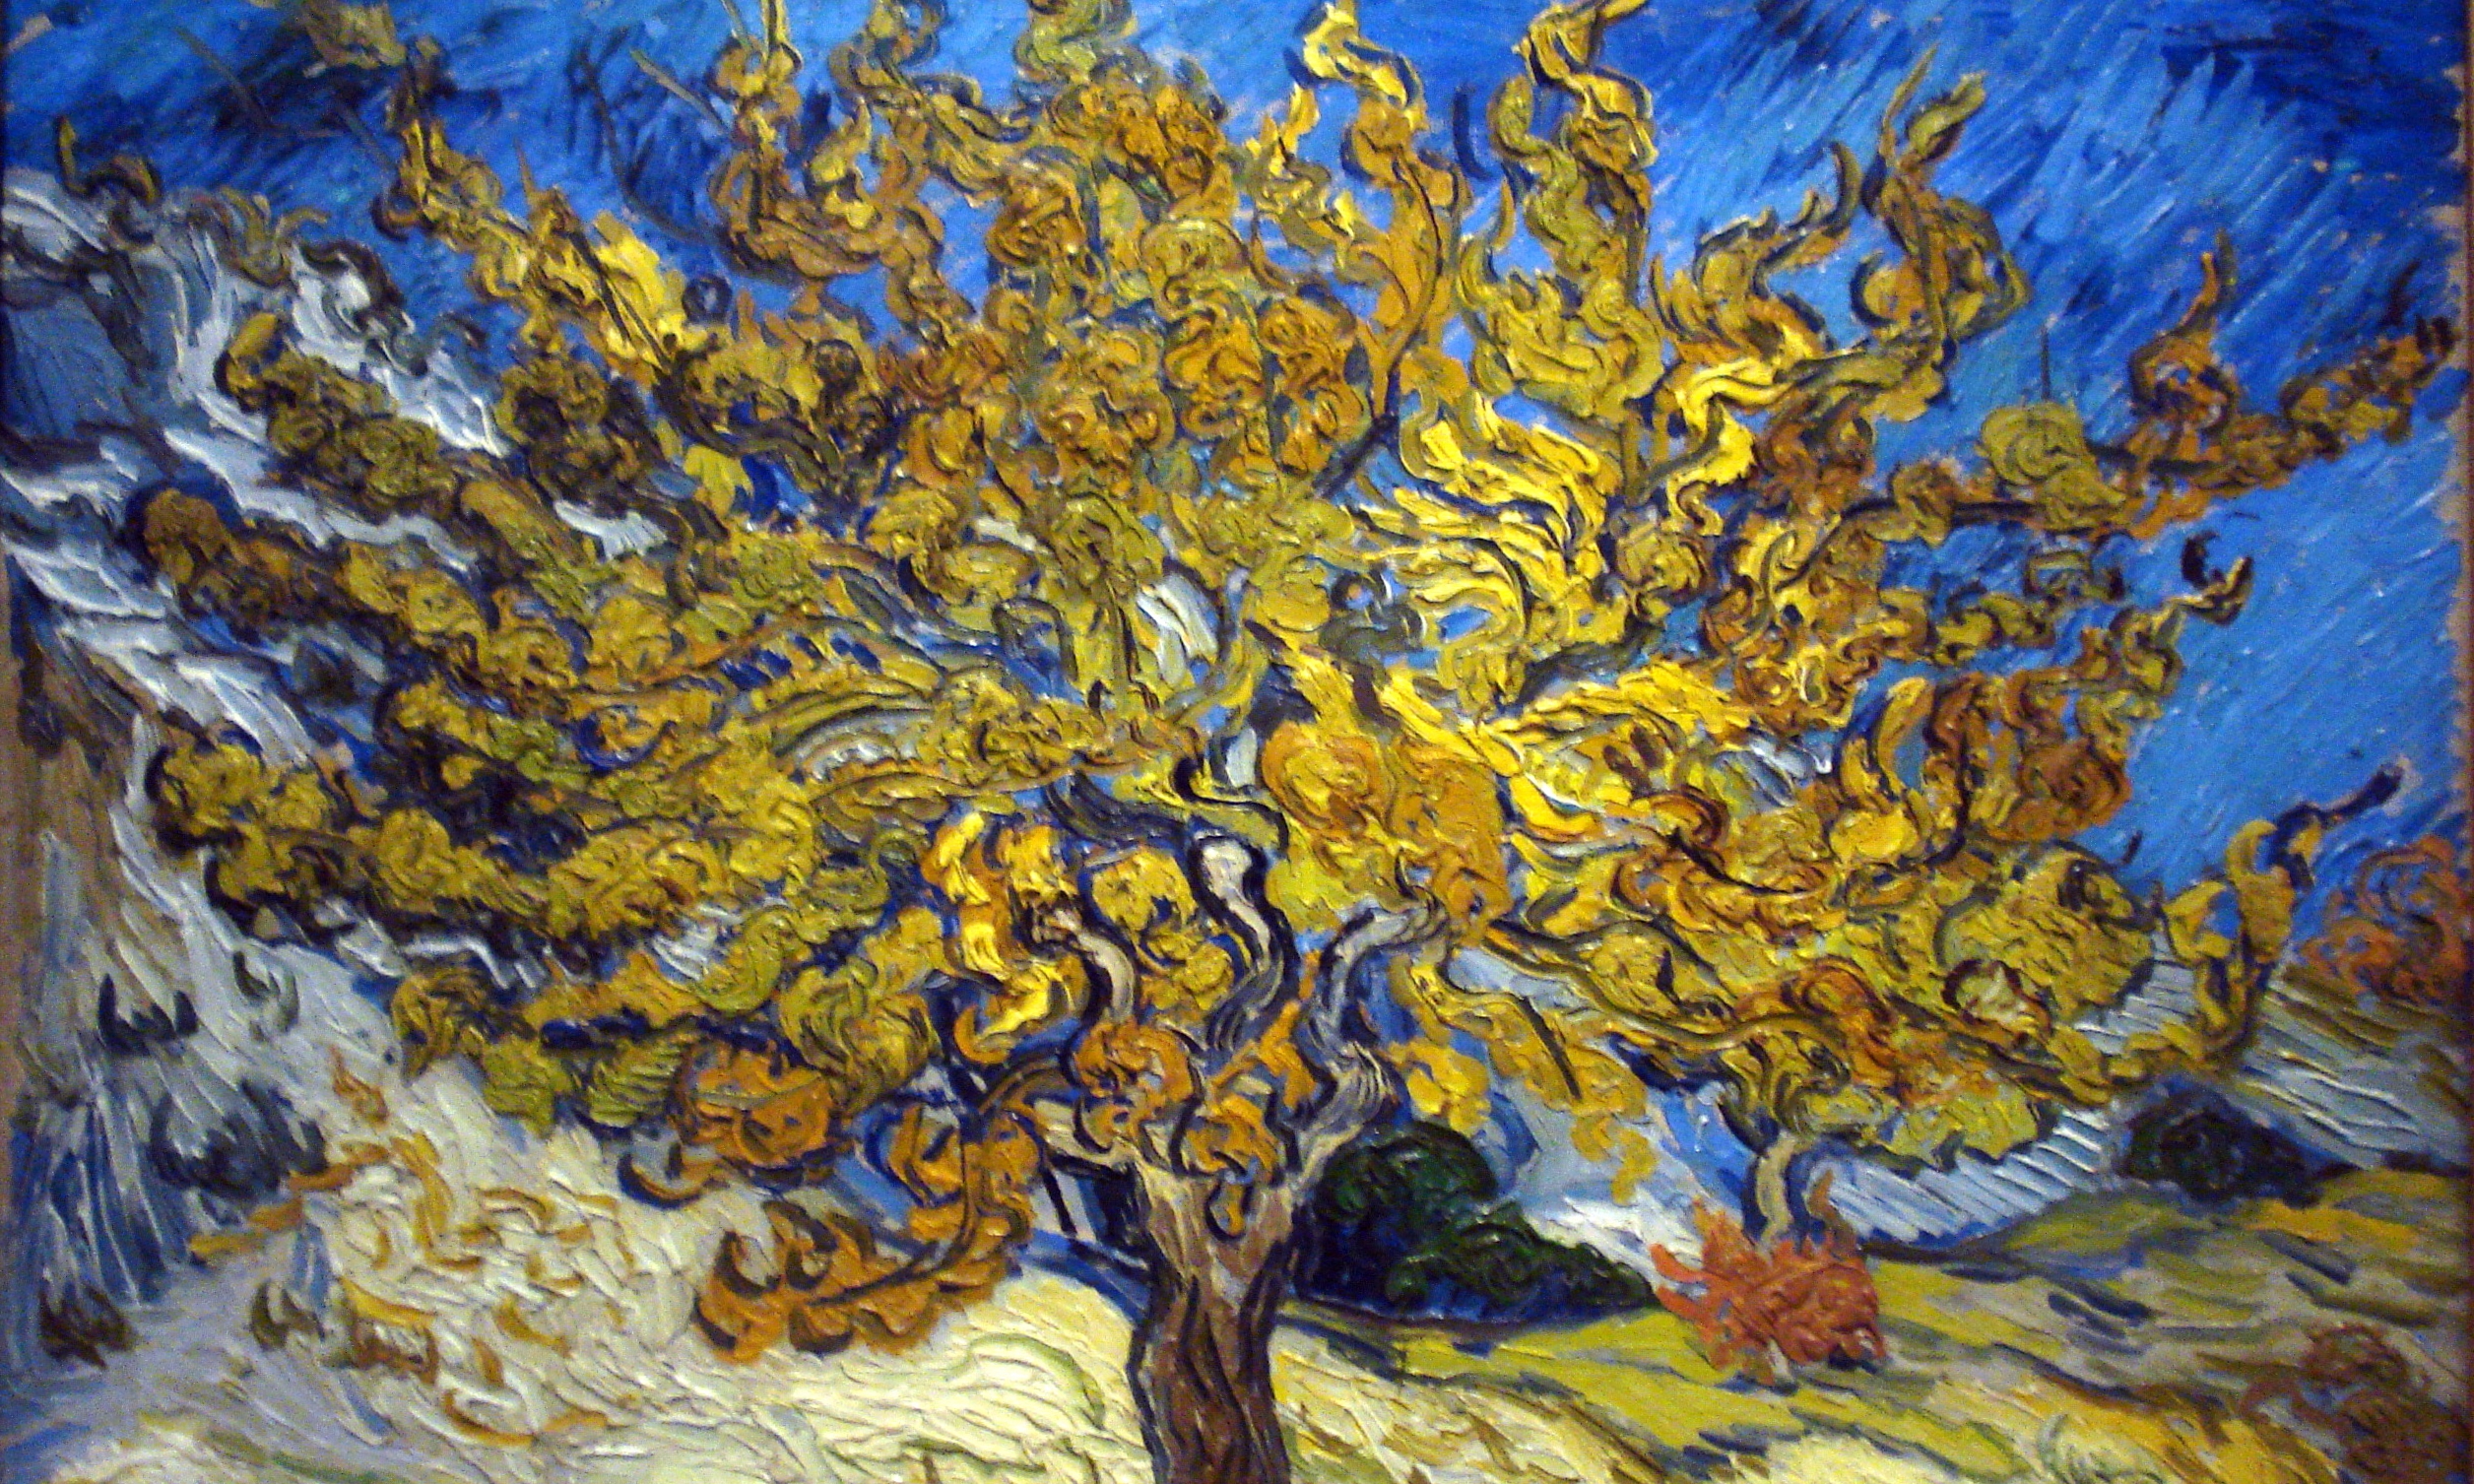 Image: Vincent Van Gogh, Mulberry Tree in Autumn